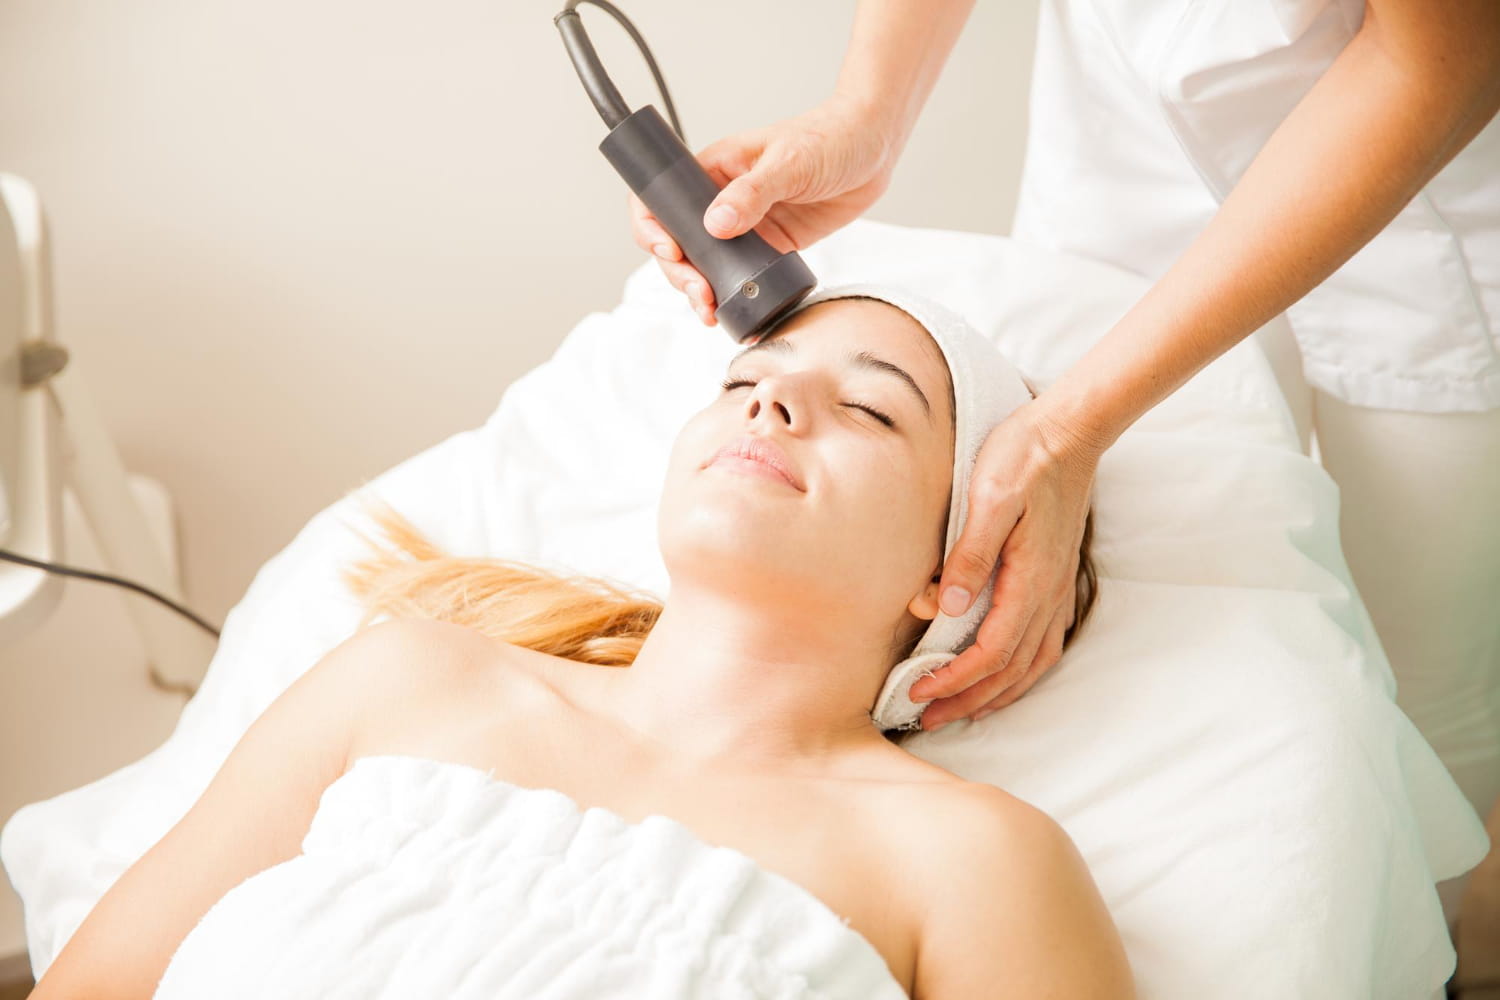 Why LED light therapy for skin is trendy